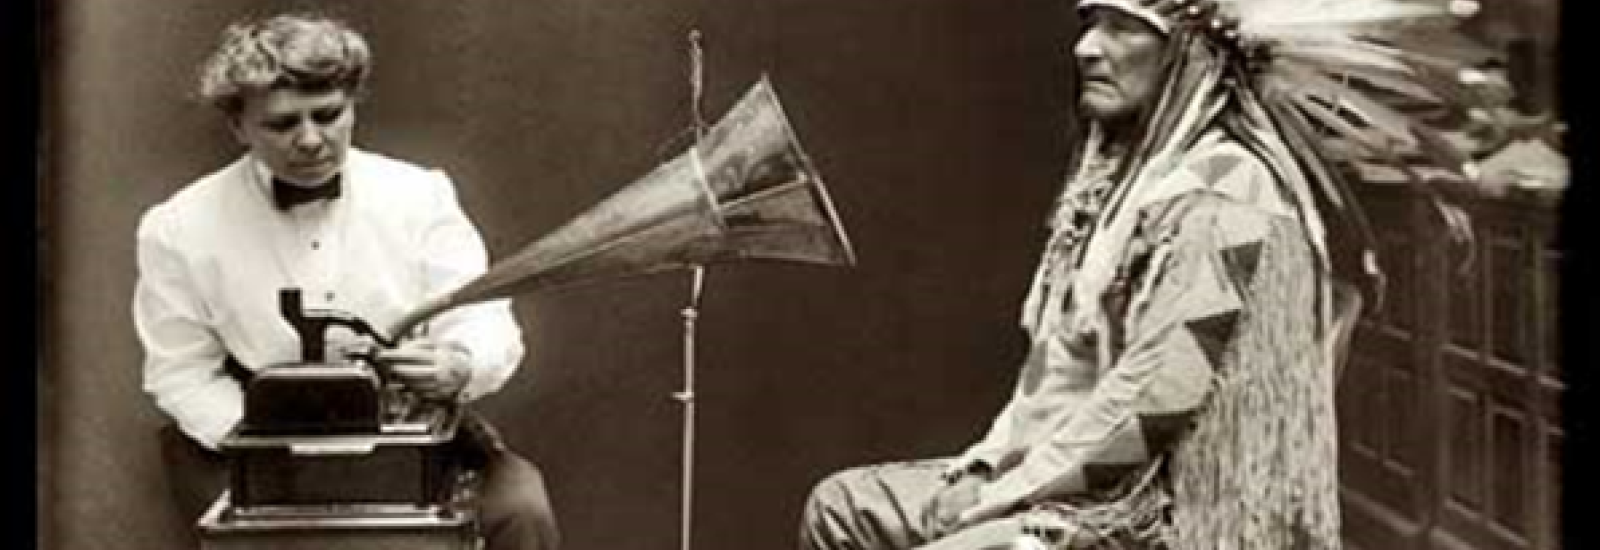 A photograph of a Native American tribesman, recording his voice into a Dictaphone. 